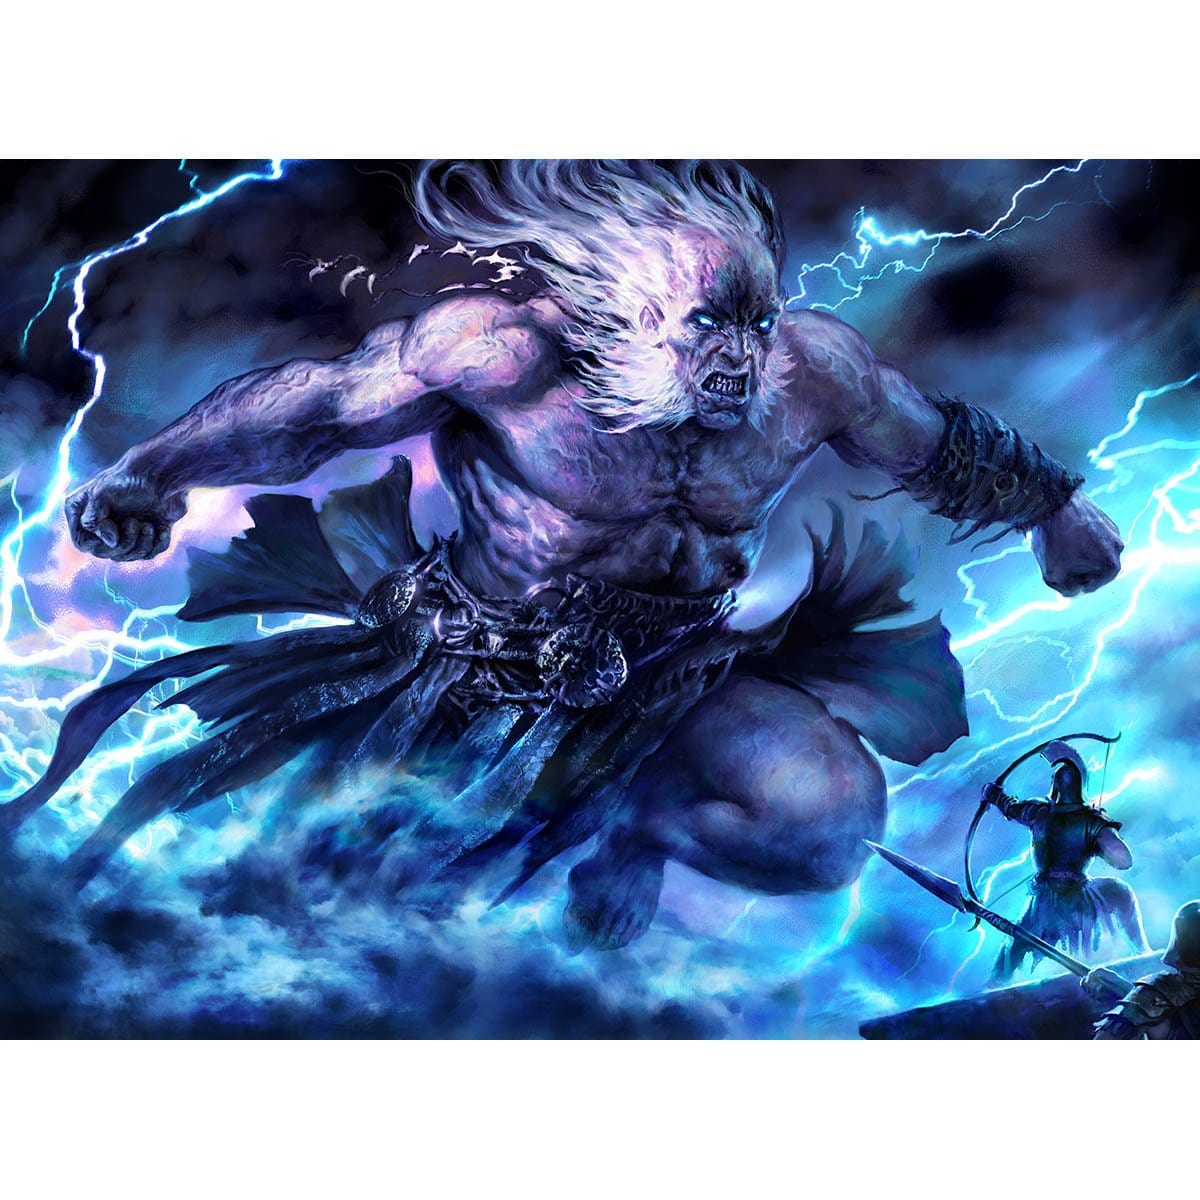 Thryx, the Sudden Storm Print - Print - Original Magic Art - Accessories for Magic the Gathering and other card games